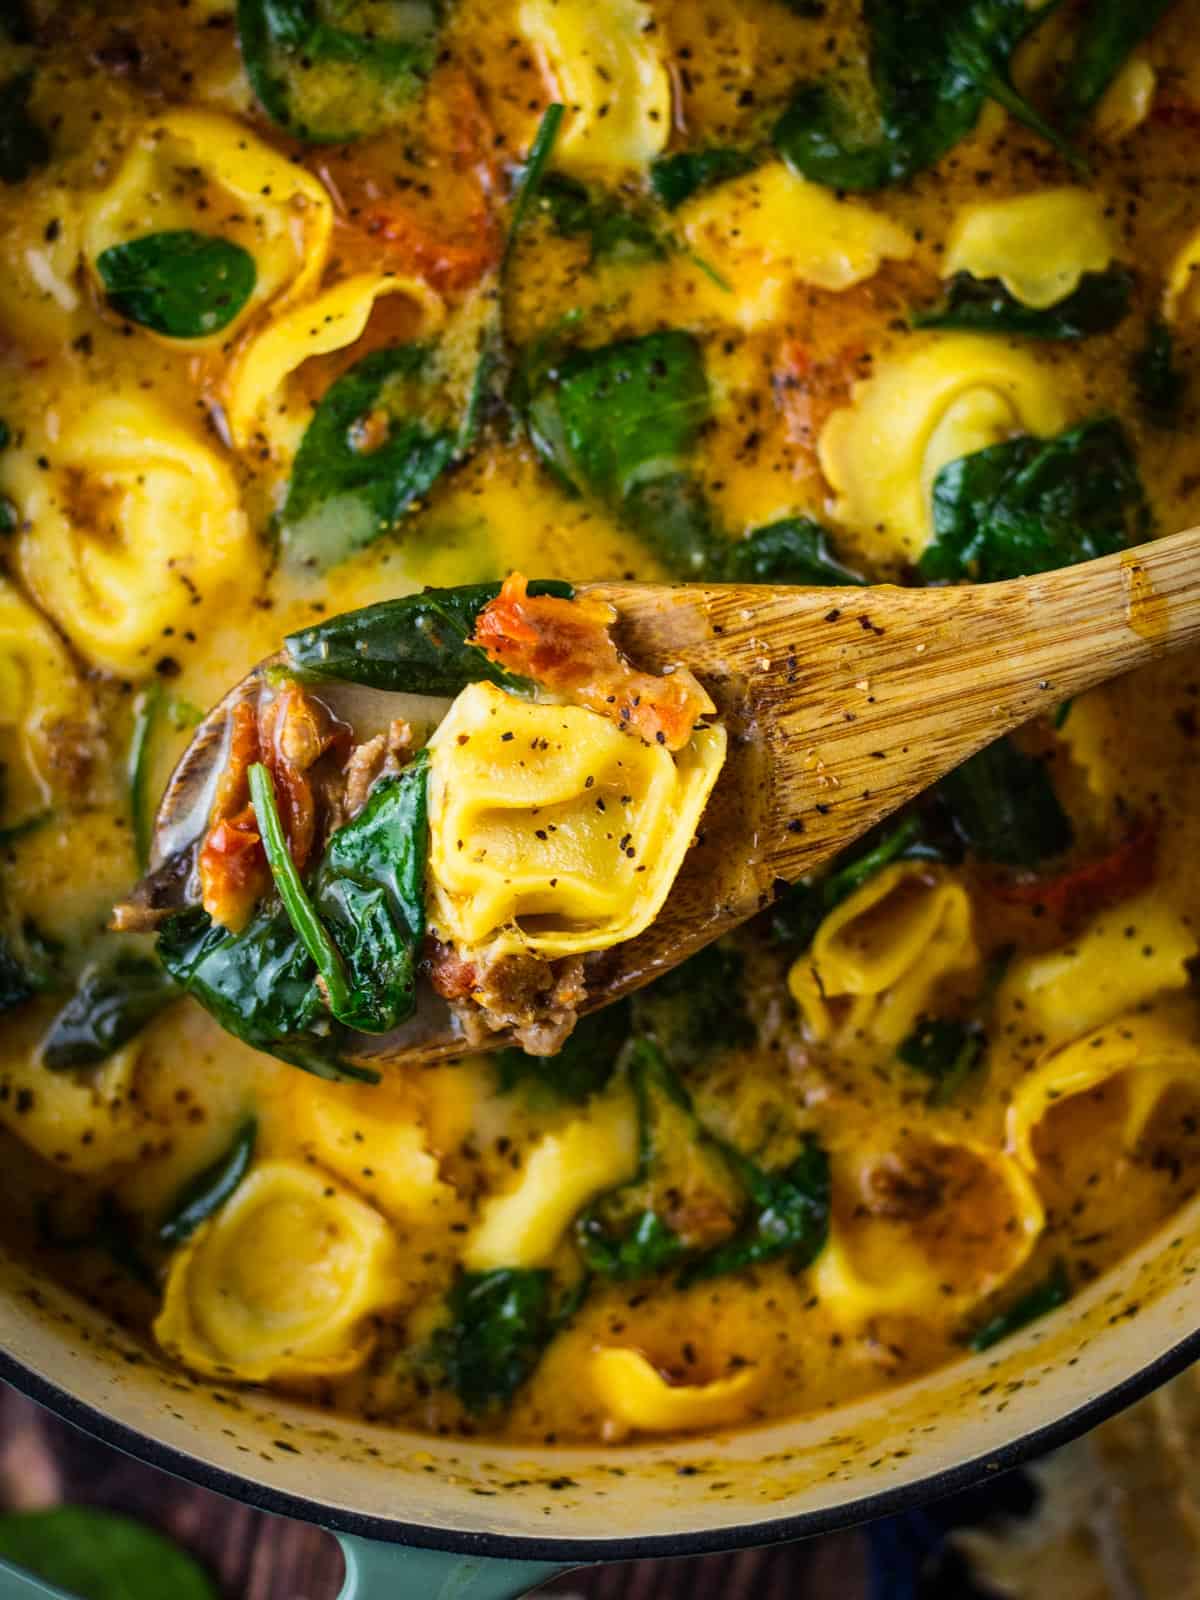 wooden spoon holding a scoop of tortellini soup with spinach and sundried tomatoes.